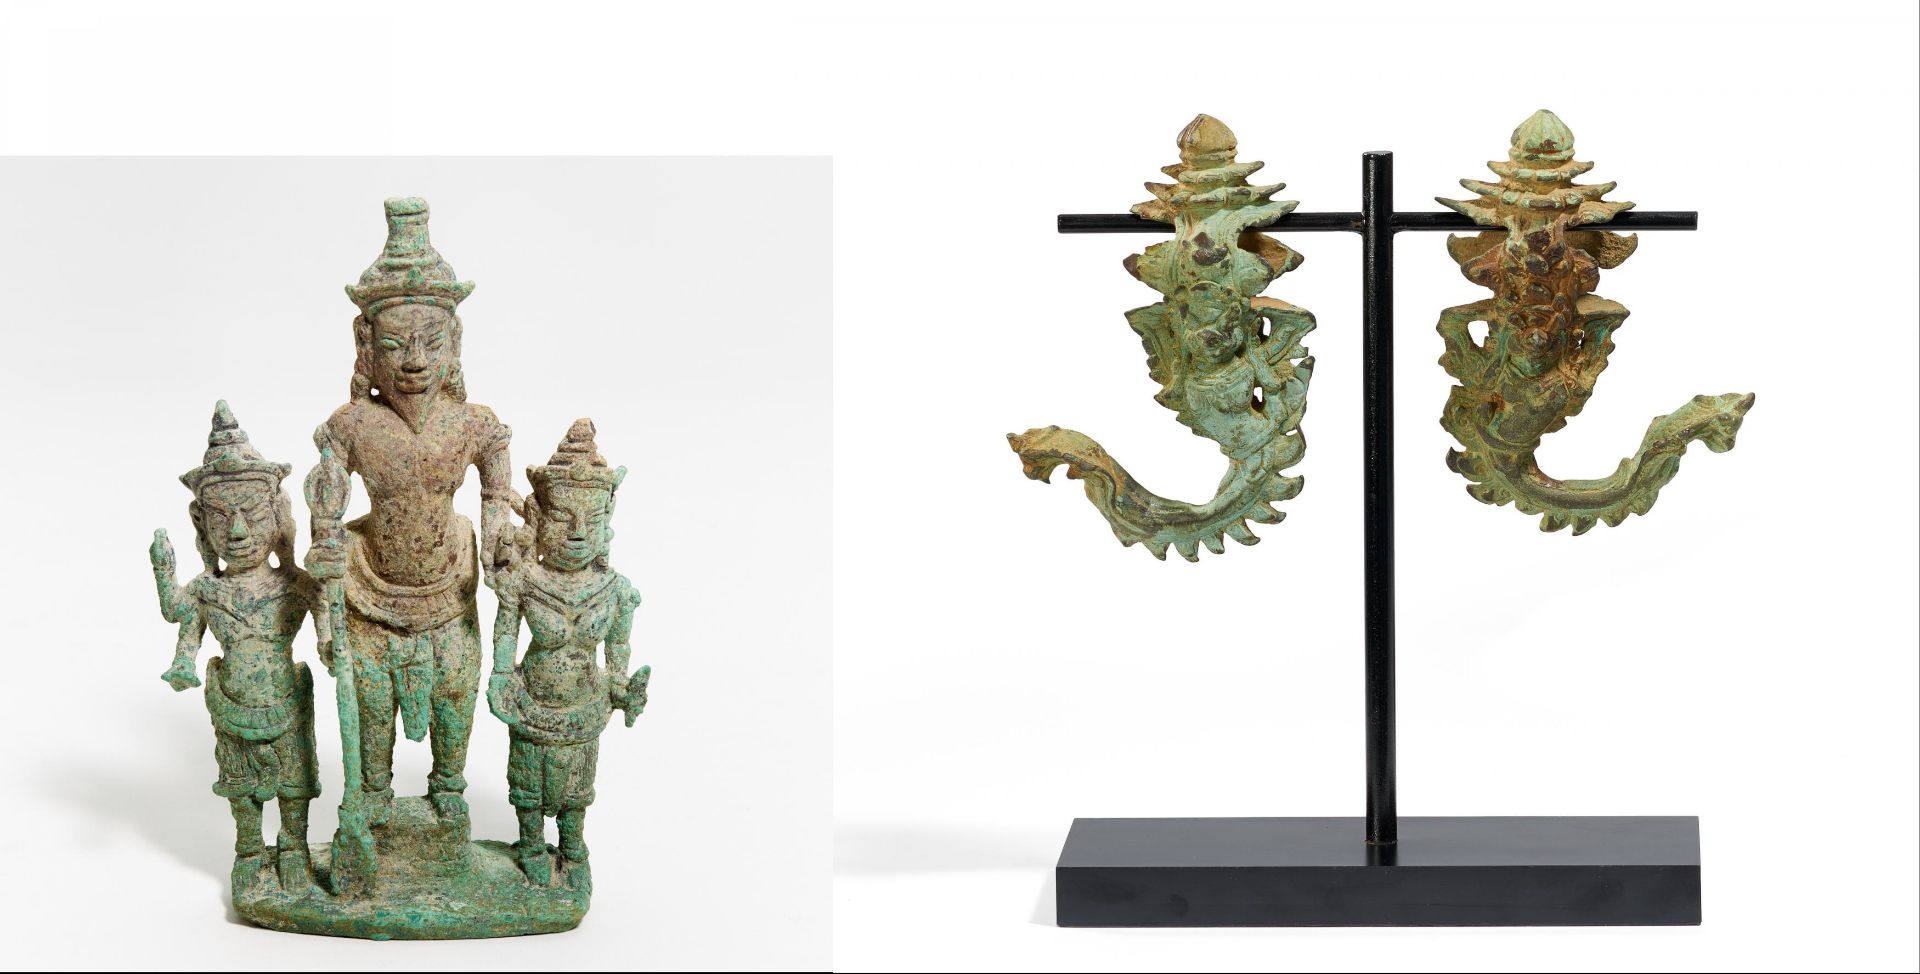 SMALL TRIAD VOTIVE FIGURE OF SHIVA AND A PAIR OF PALANQUIN HOOKS WITH GARUDA. Origin: Khmer.